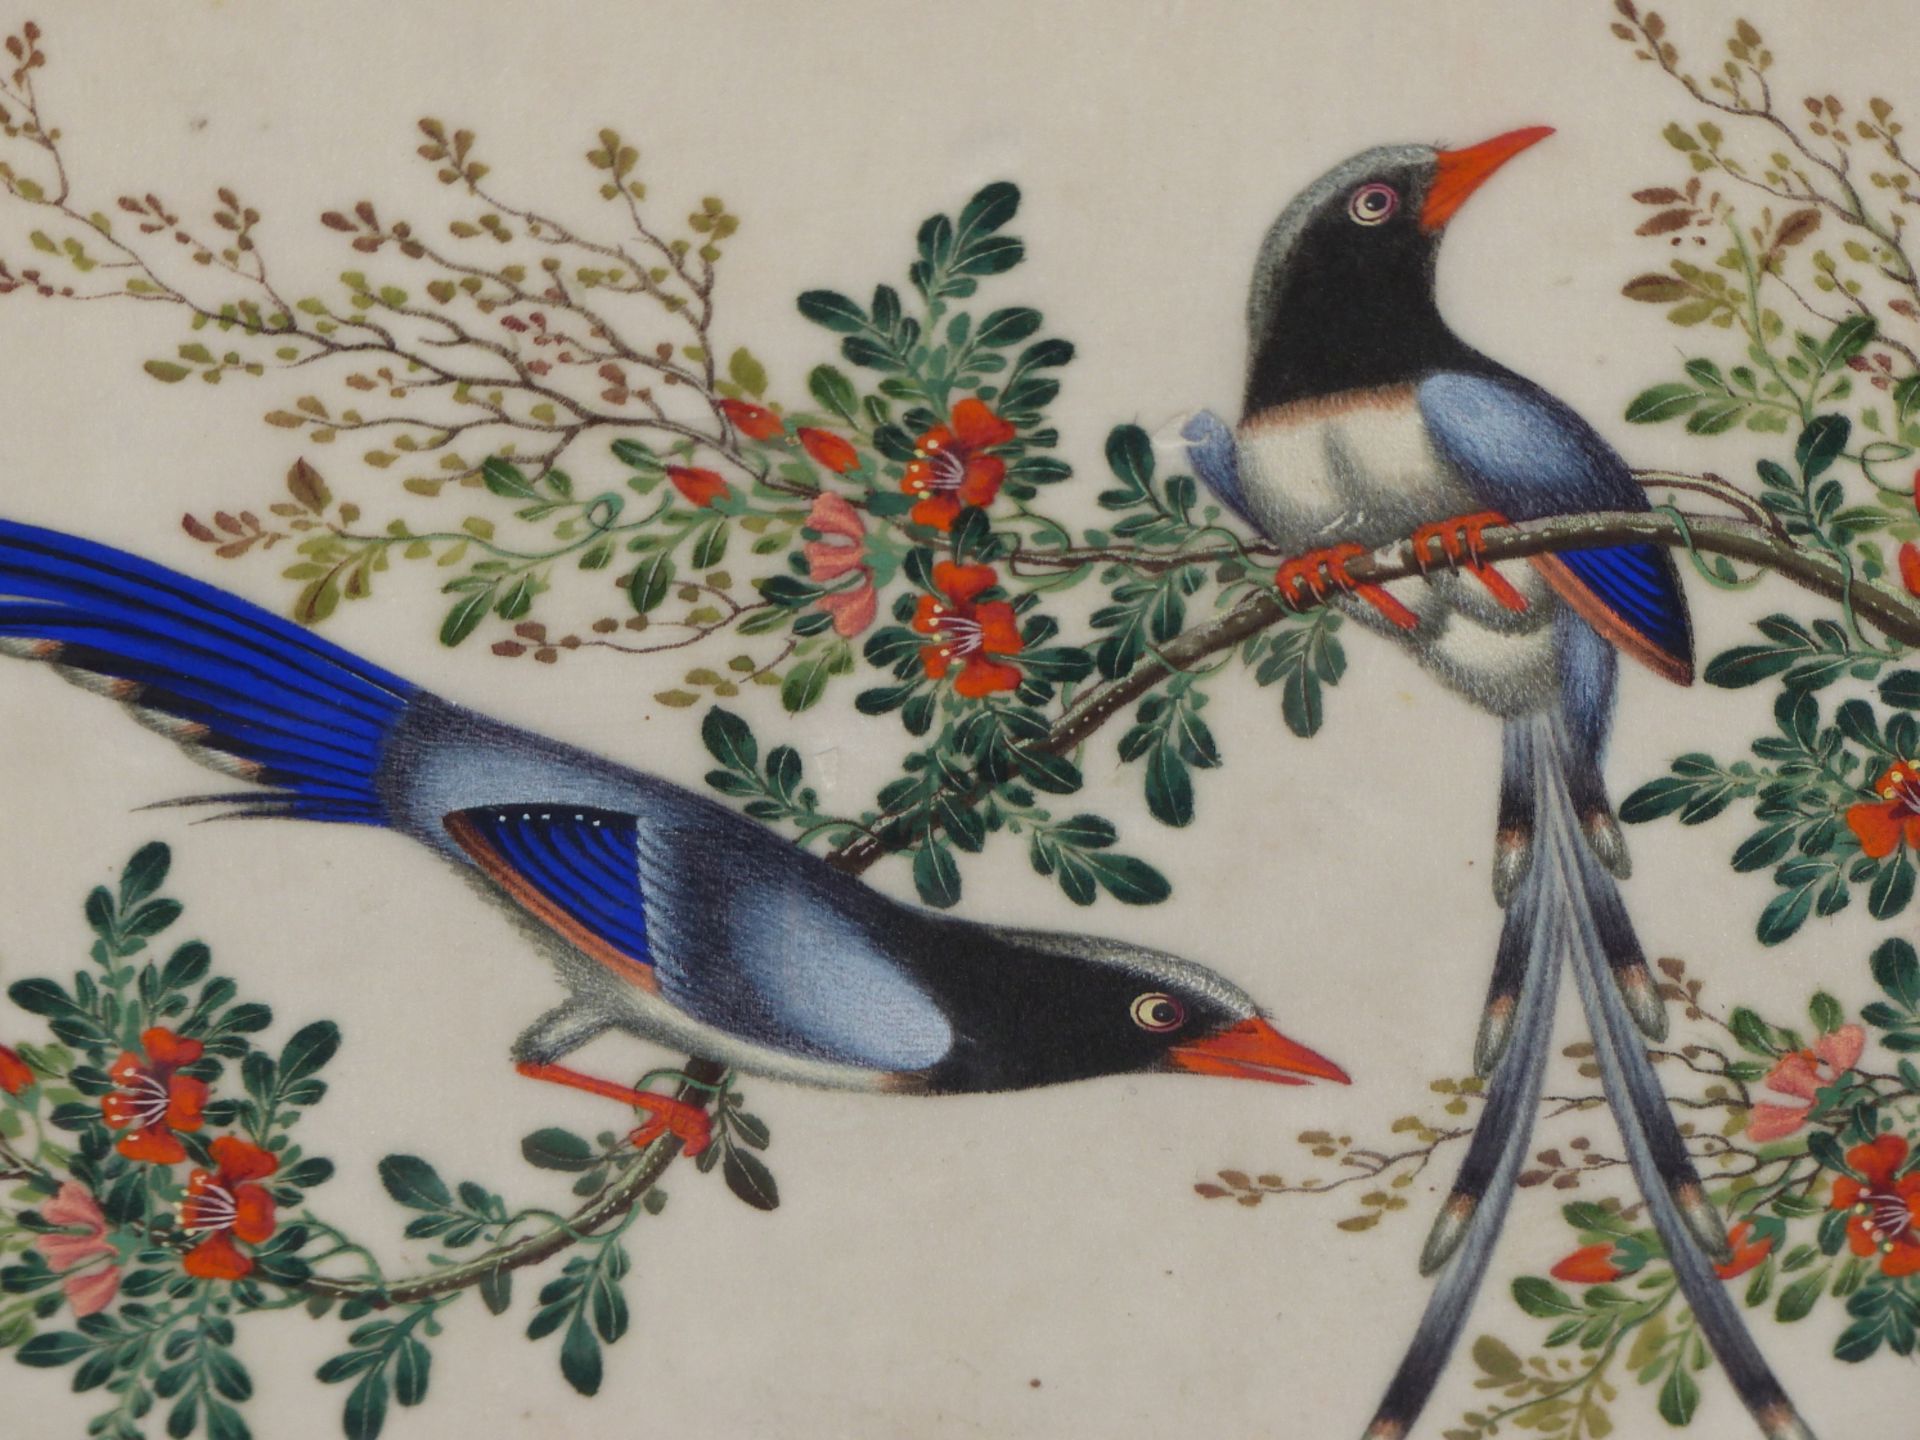 19TH CENTURY CHINESE. EXOTIC BIRDS ON BLOSSOM BRANCHES. WATERCOLOUR ON RICE PAPER. A PAIR. 30 X 19